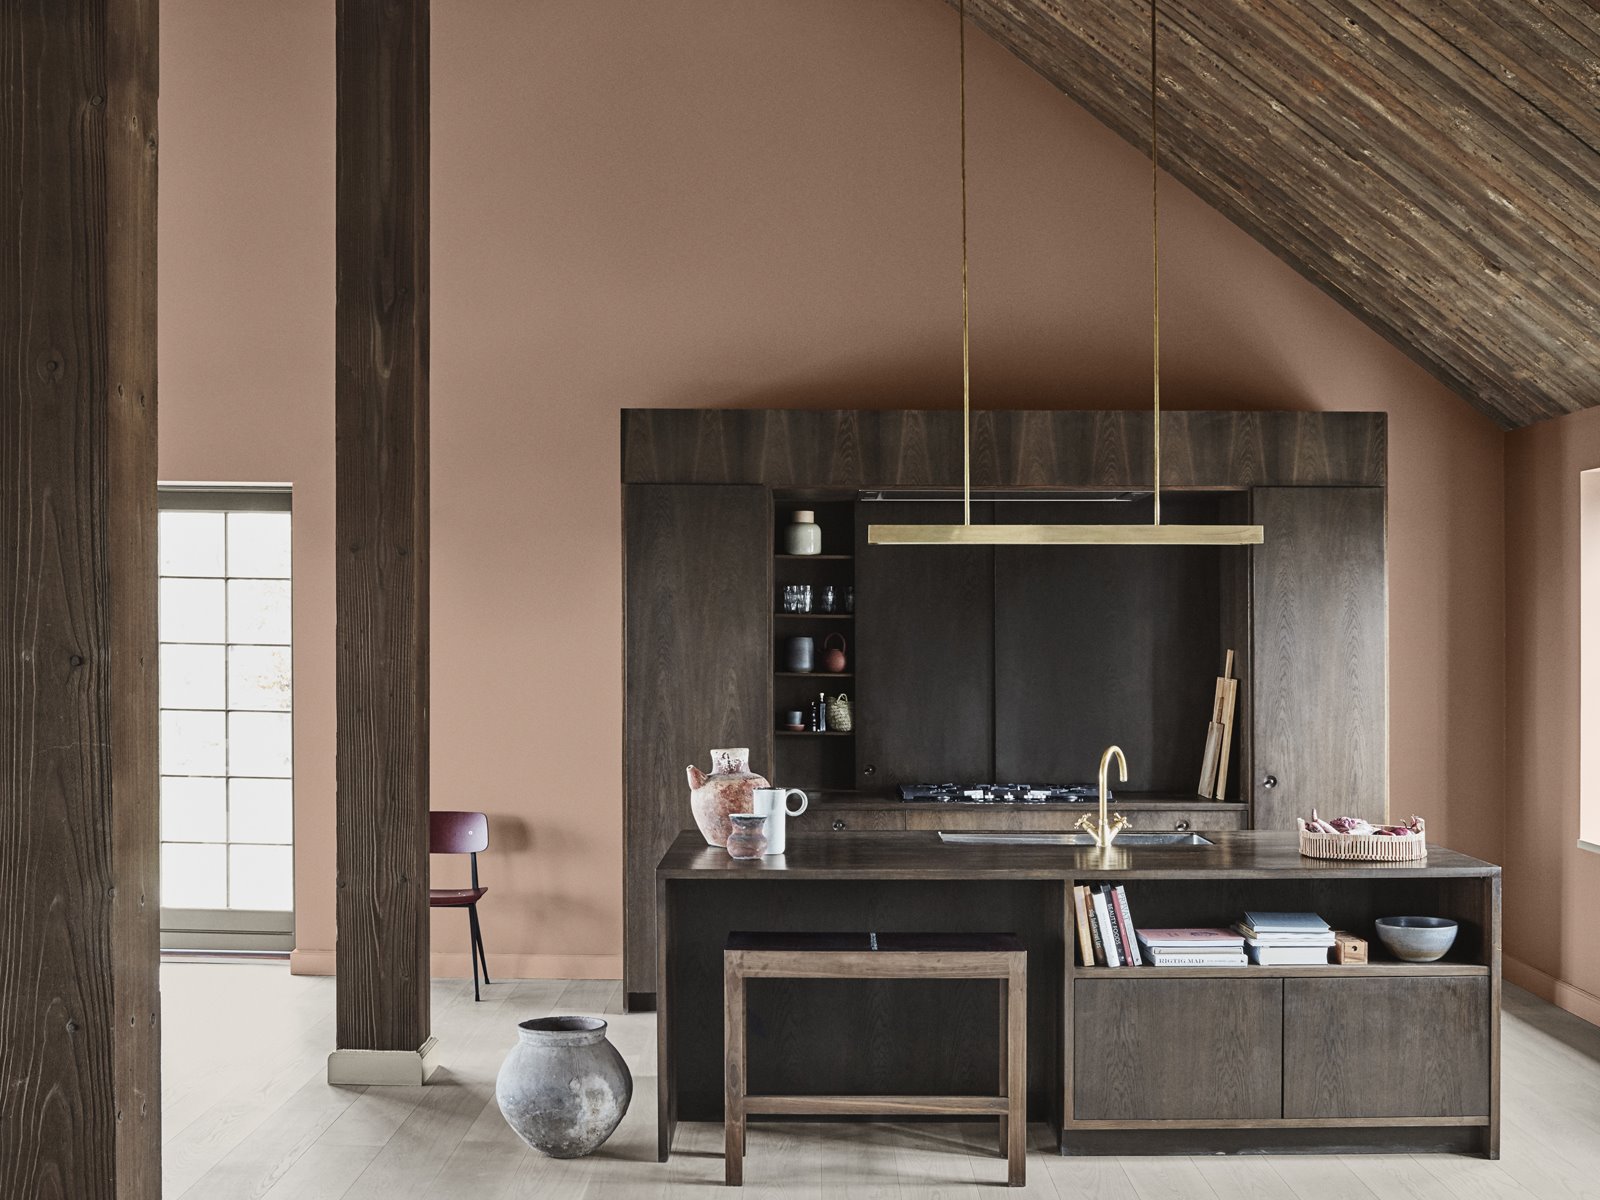 Kitchen with brown walls and wooden furniture.  the color of spirituality